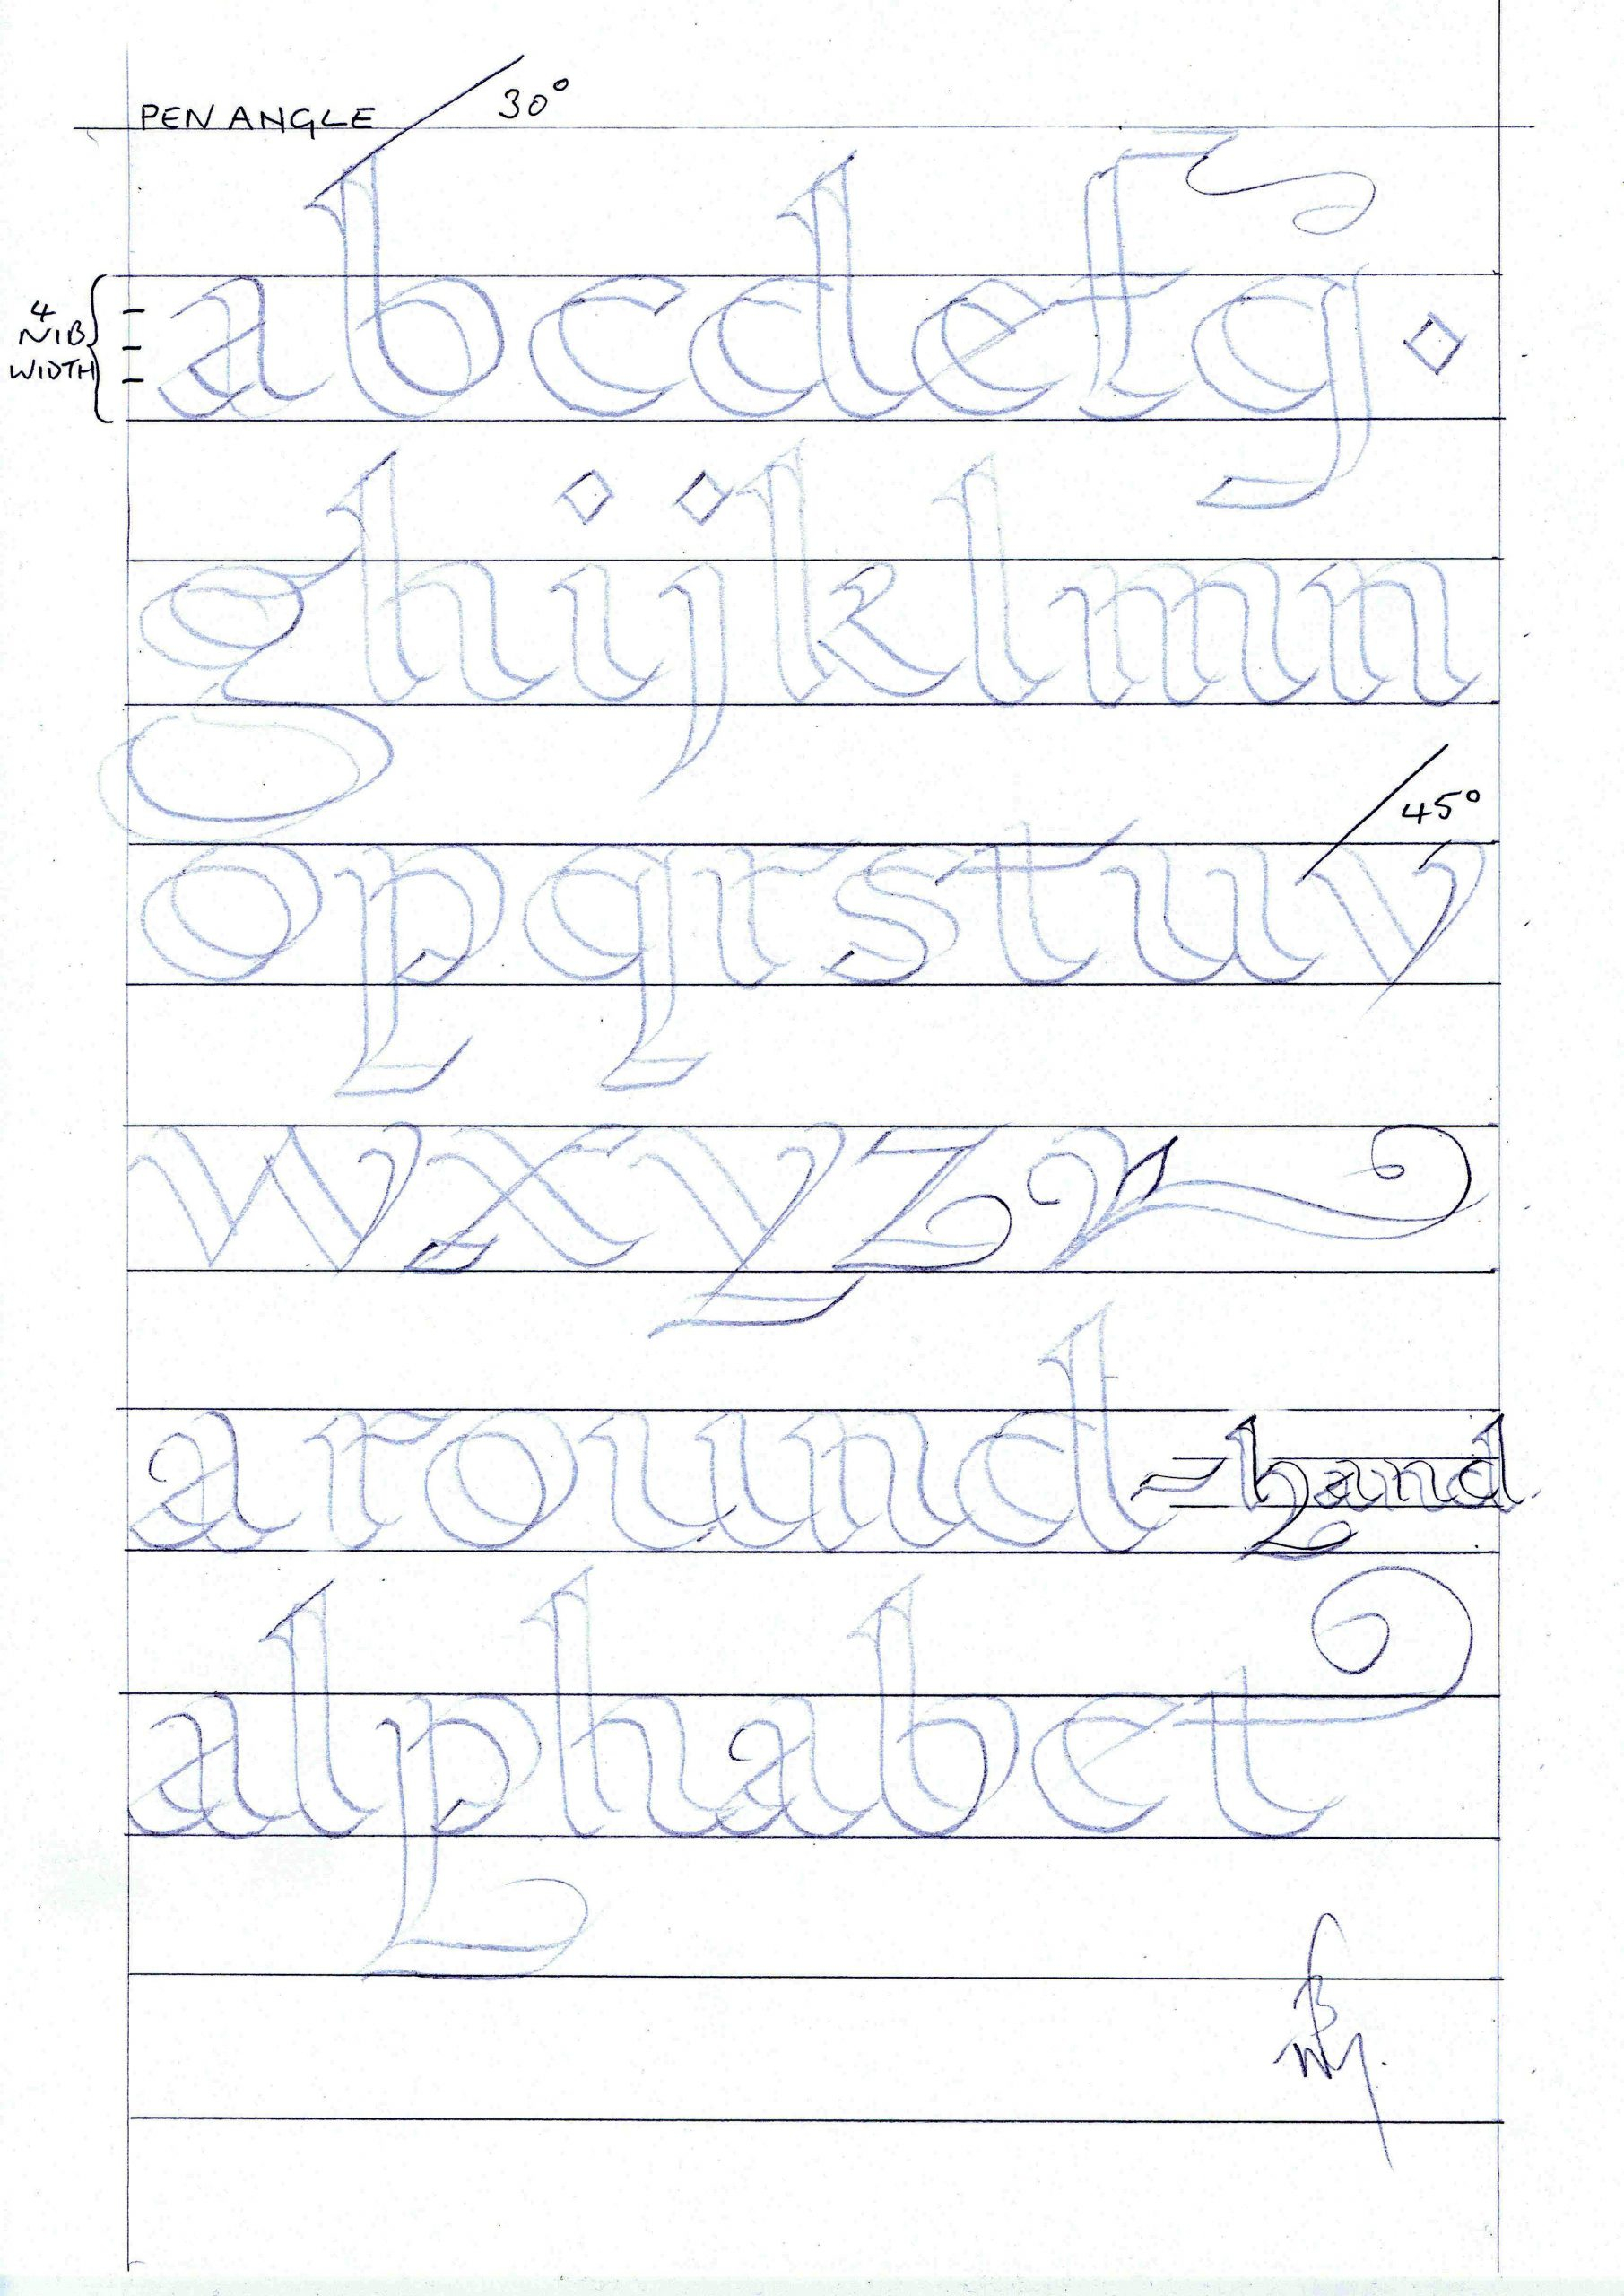 free-printable-calligraphy-worksheets-for-beginners